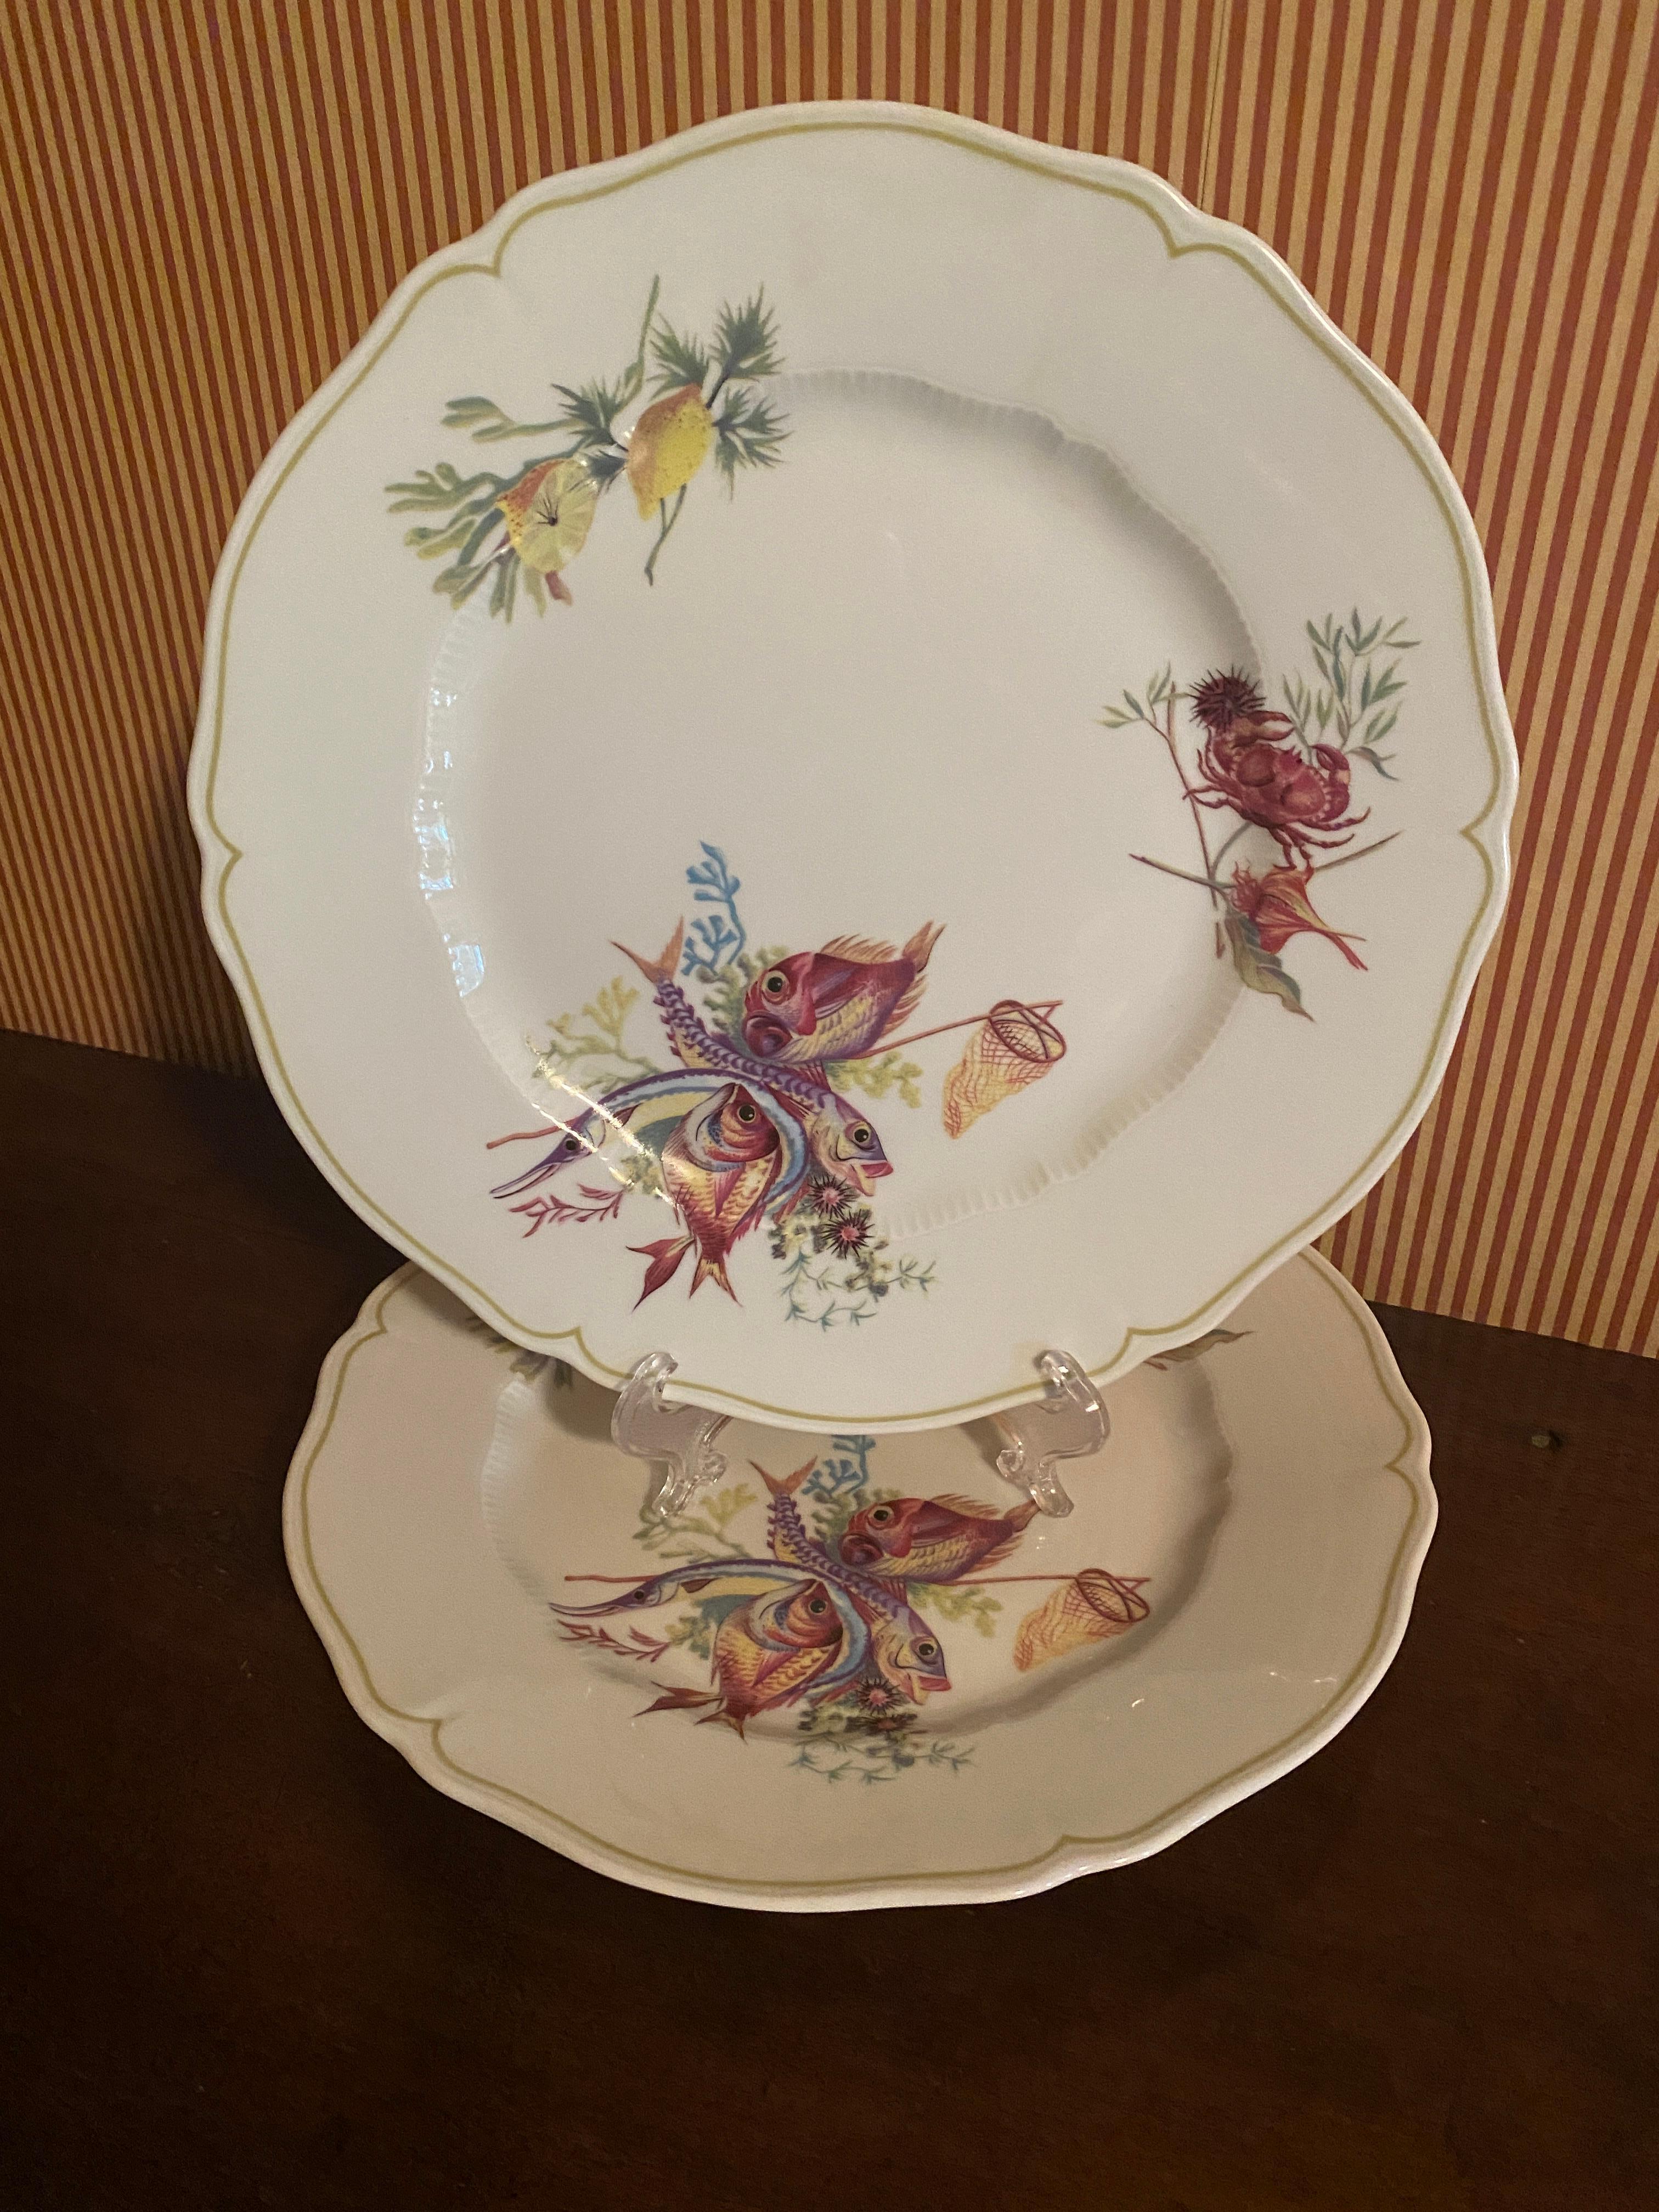 Set of 12 Havilland- Limoges Dinner Plates, Six Fish and Crustacean Designs For Sale 2